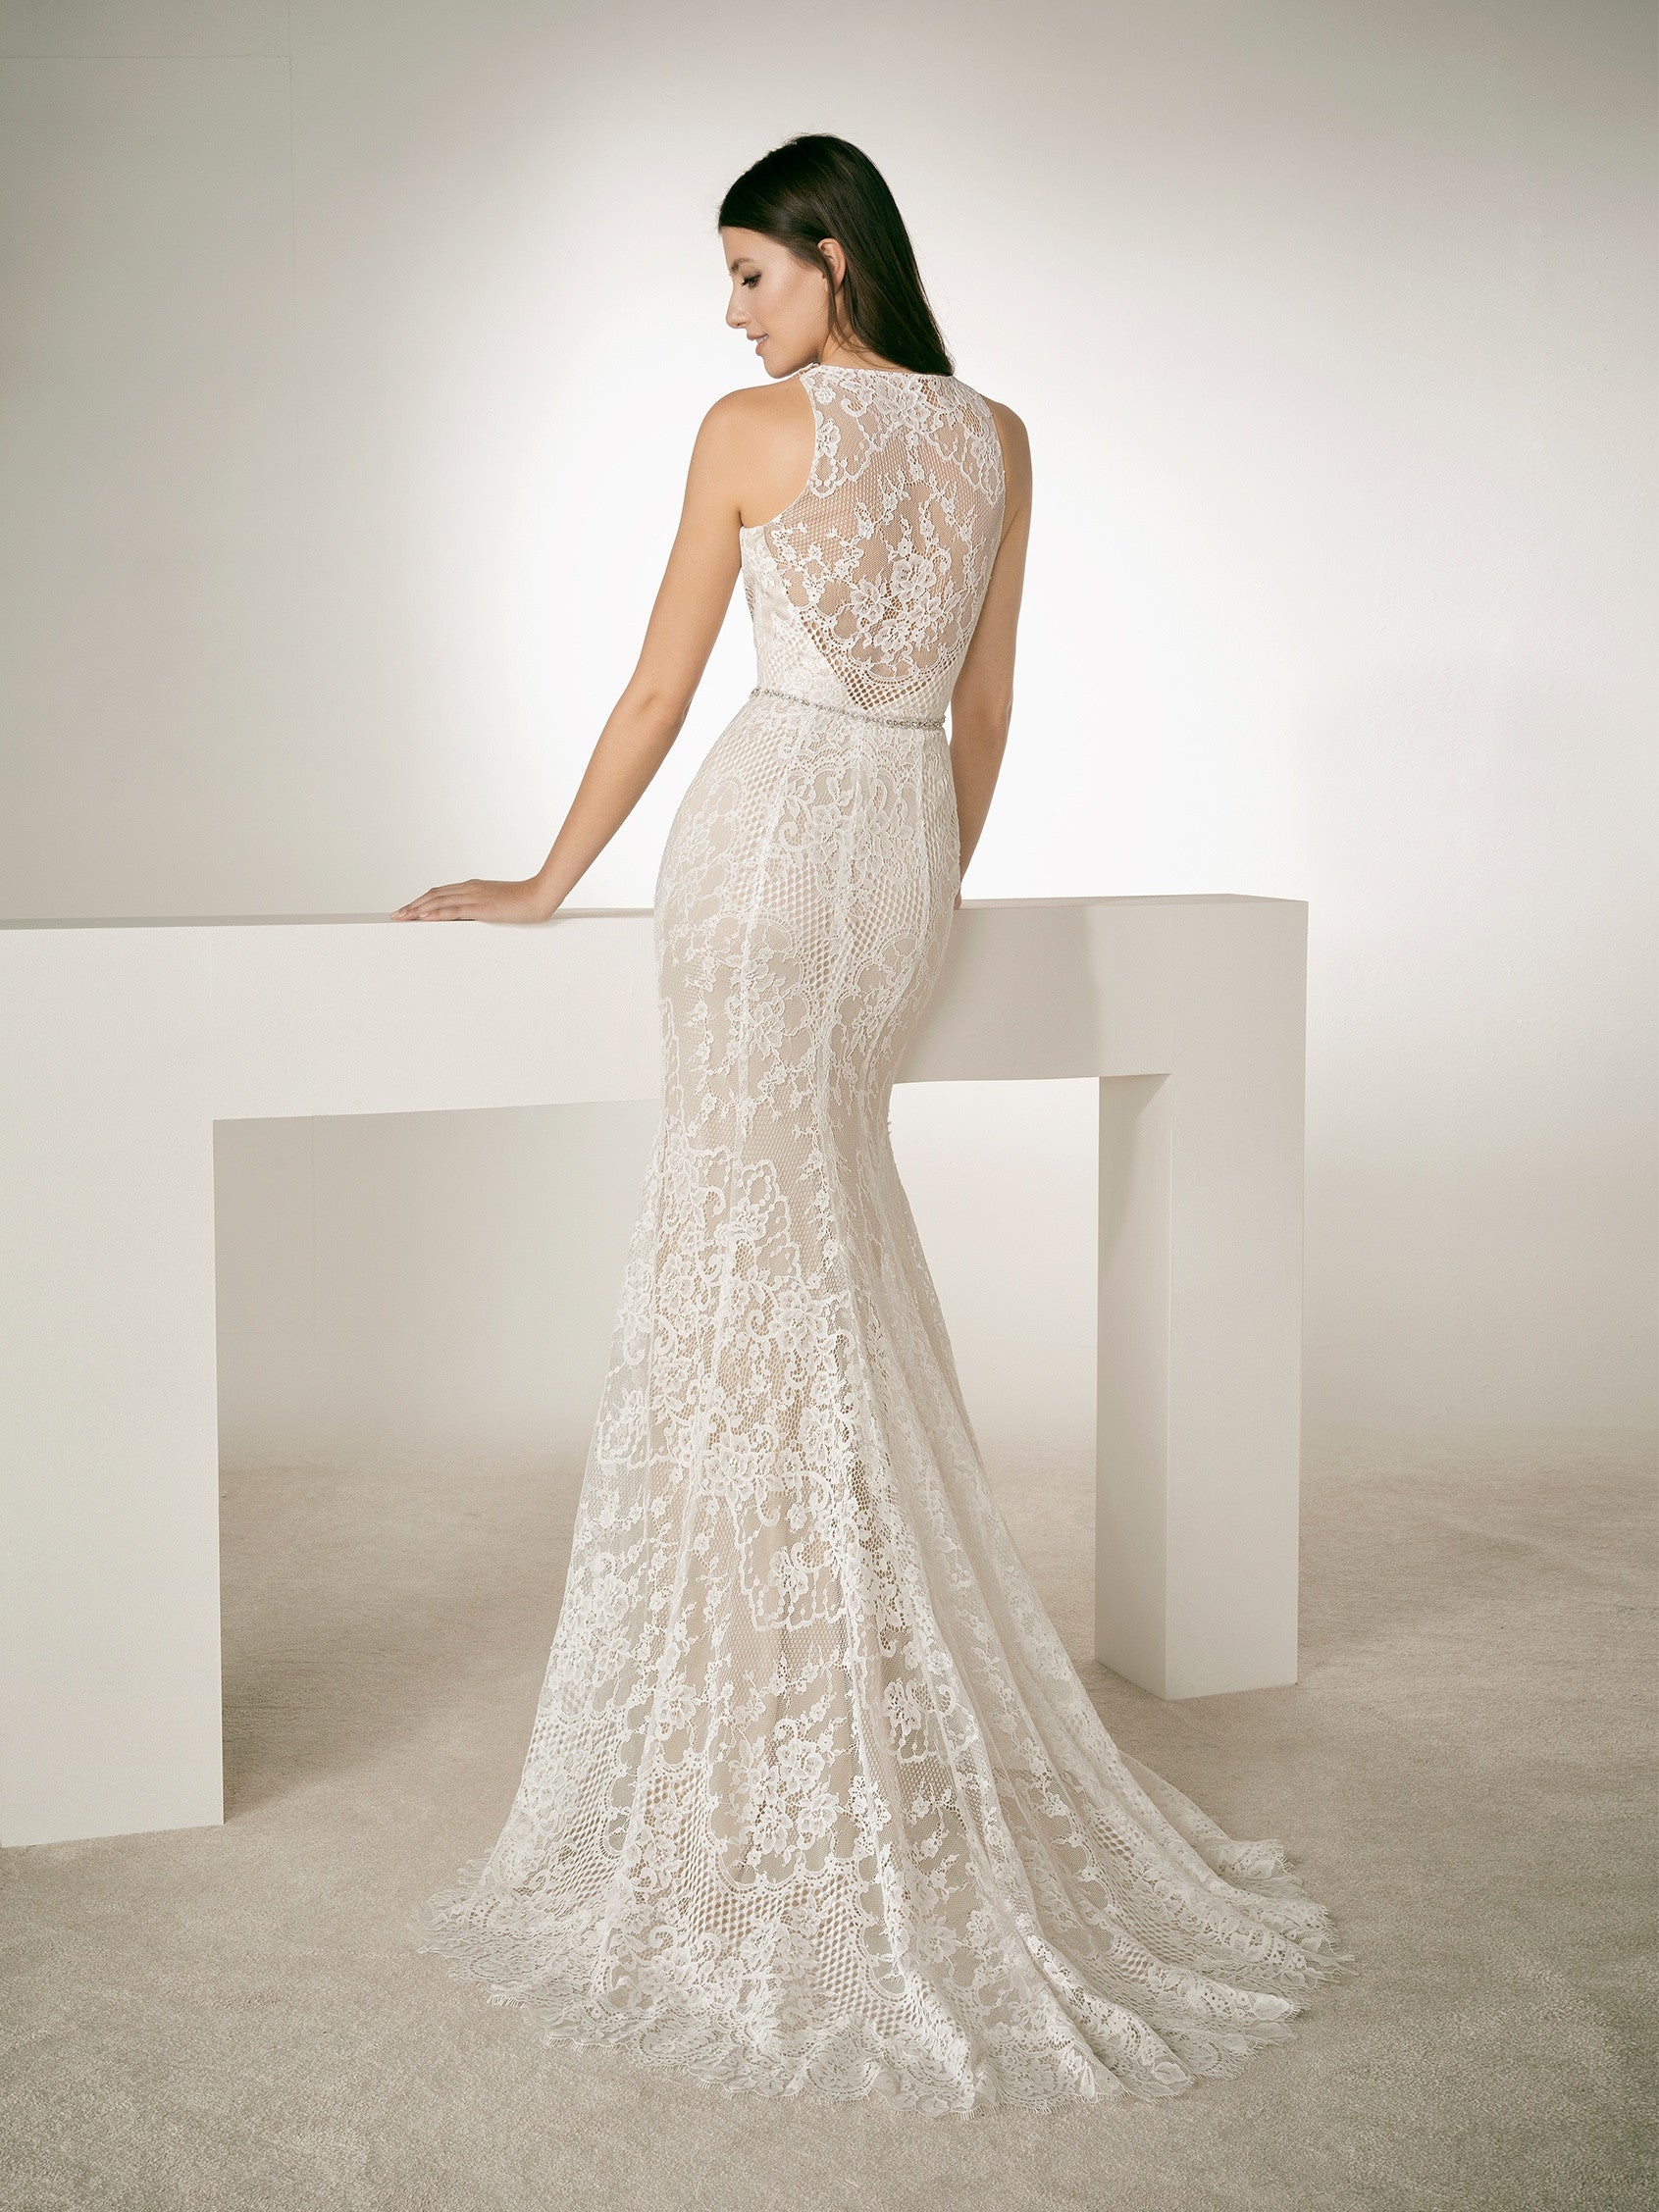 White One Bridal RAF is a stunning Lace Wedding Gown Featuring a Long Fitted Mermaid Silhouette with a Sheer Lace illusion high halter neckline. This sheer Back bridal gown features a crystal waist belt. and sweeping train.  IN STOCK FOR IMMEDIATE DELIVERY   US SIZE 8 -OFF WHITE/LIGHT BEIGE